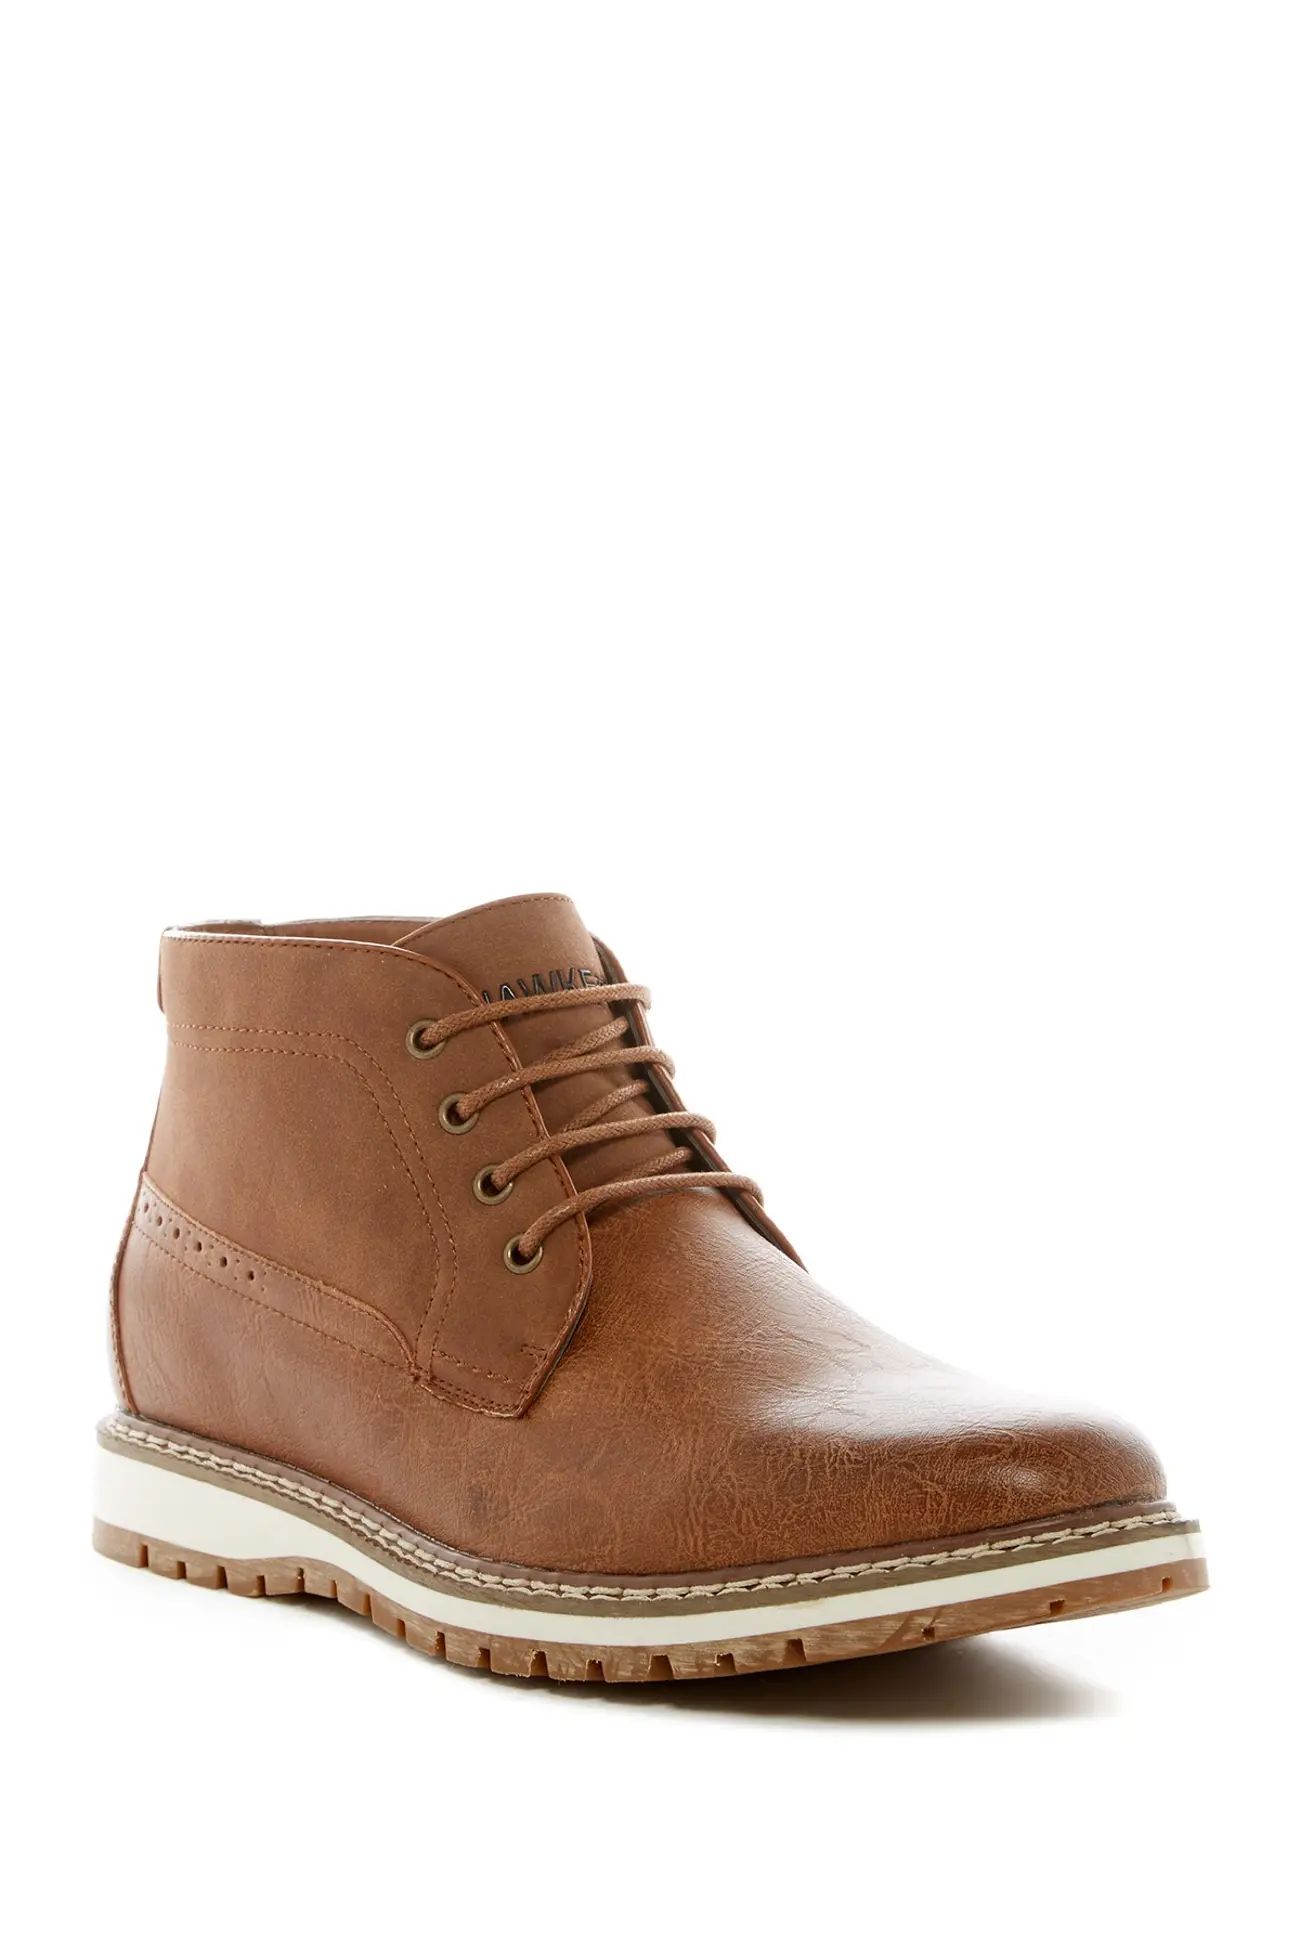 Hawke & Co. | Fairweather Lace-Up Boot | Nordstrom Rack | Nordstrom Rack